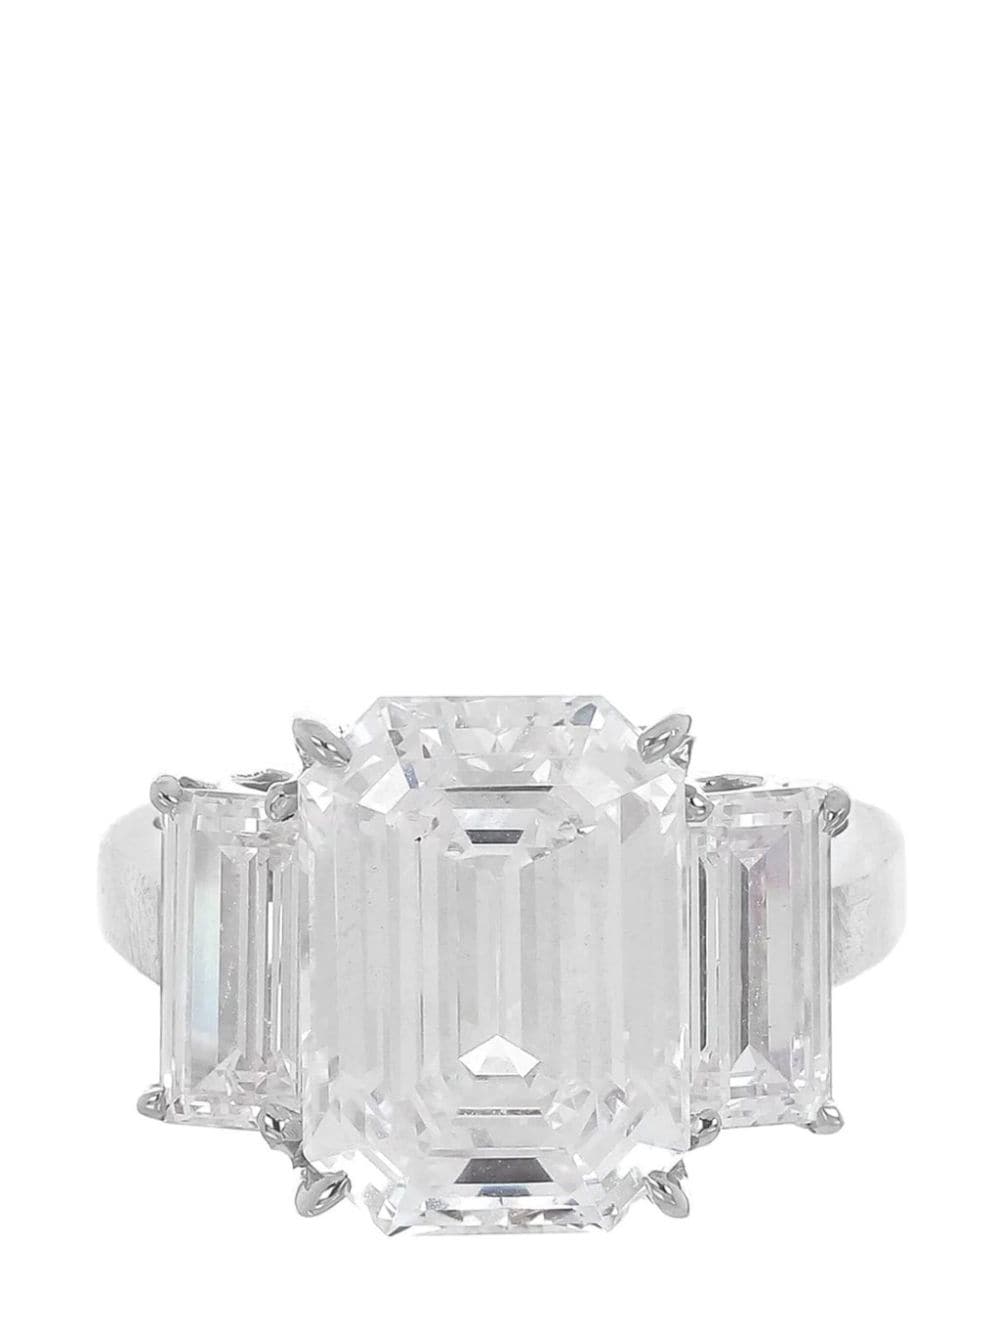 14kt white gold cubic zirconia ring